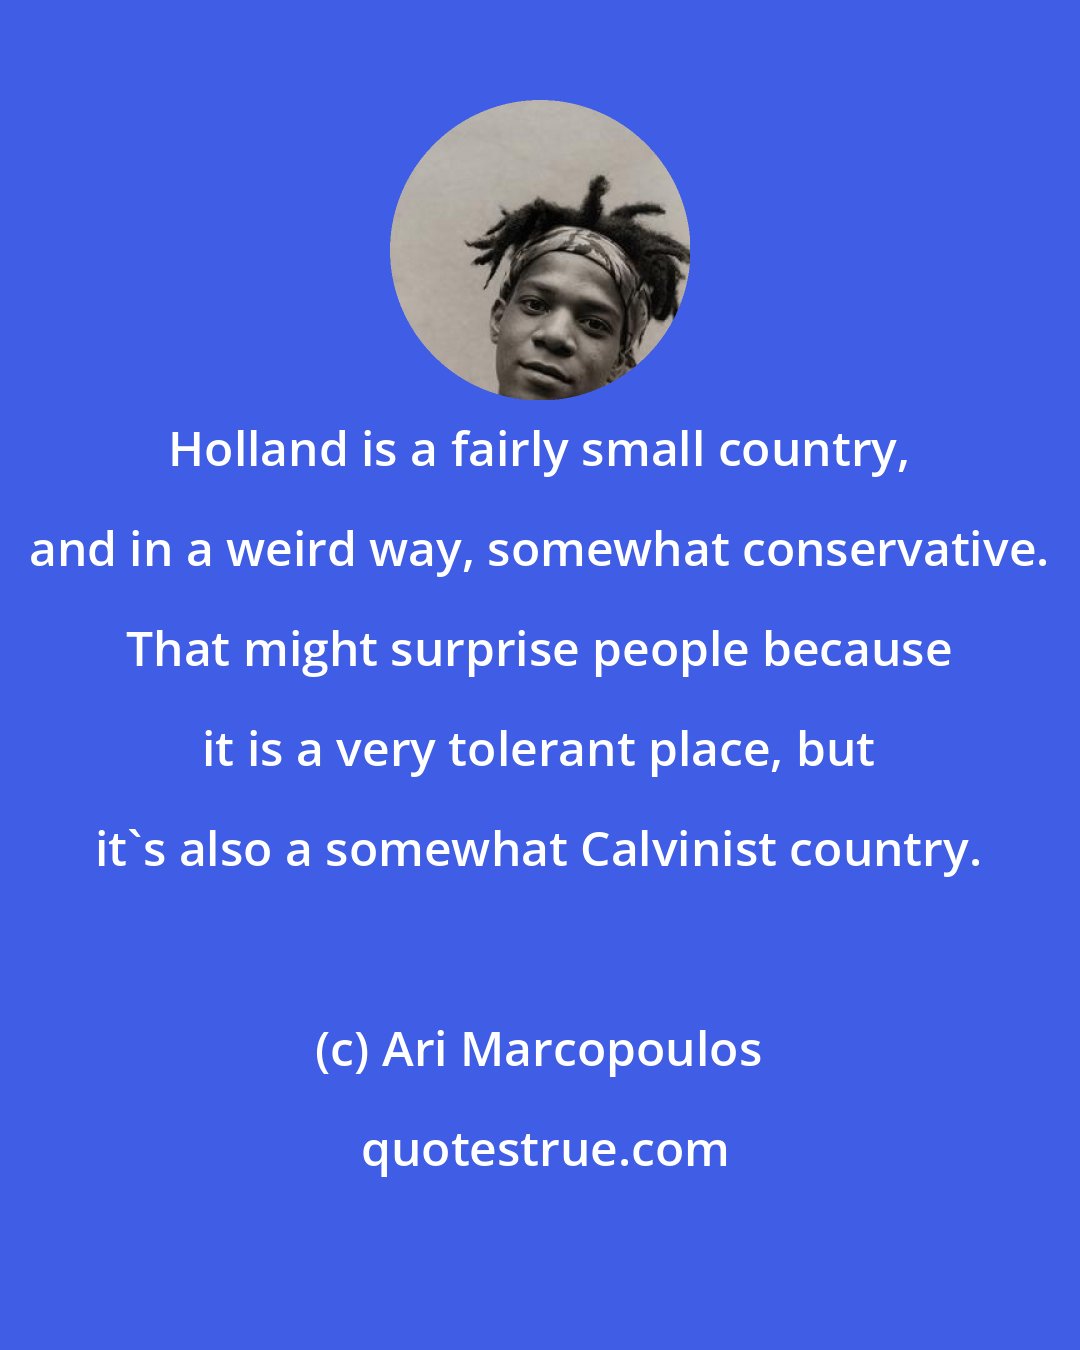 Ari Marcopoulos: Holland is a fairly small country, and in a weird way, somewhat conservative. That might surprise people because it is a very tolerant place, but it's also a somewhat Calvinist country.